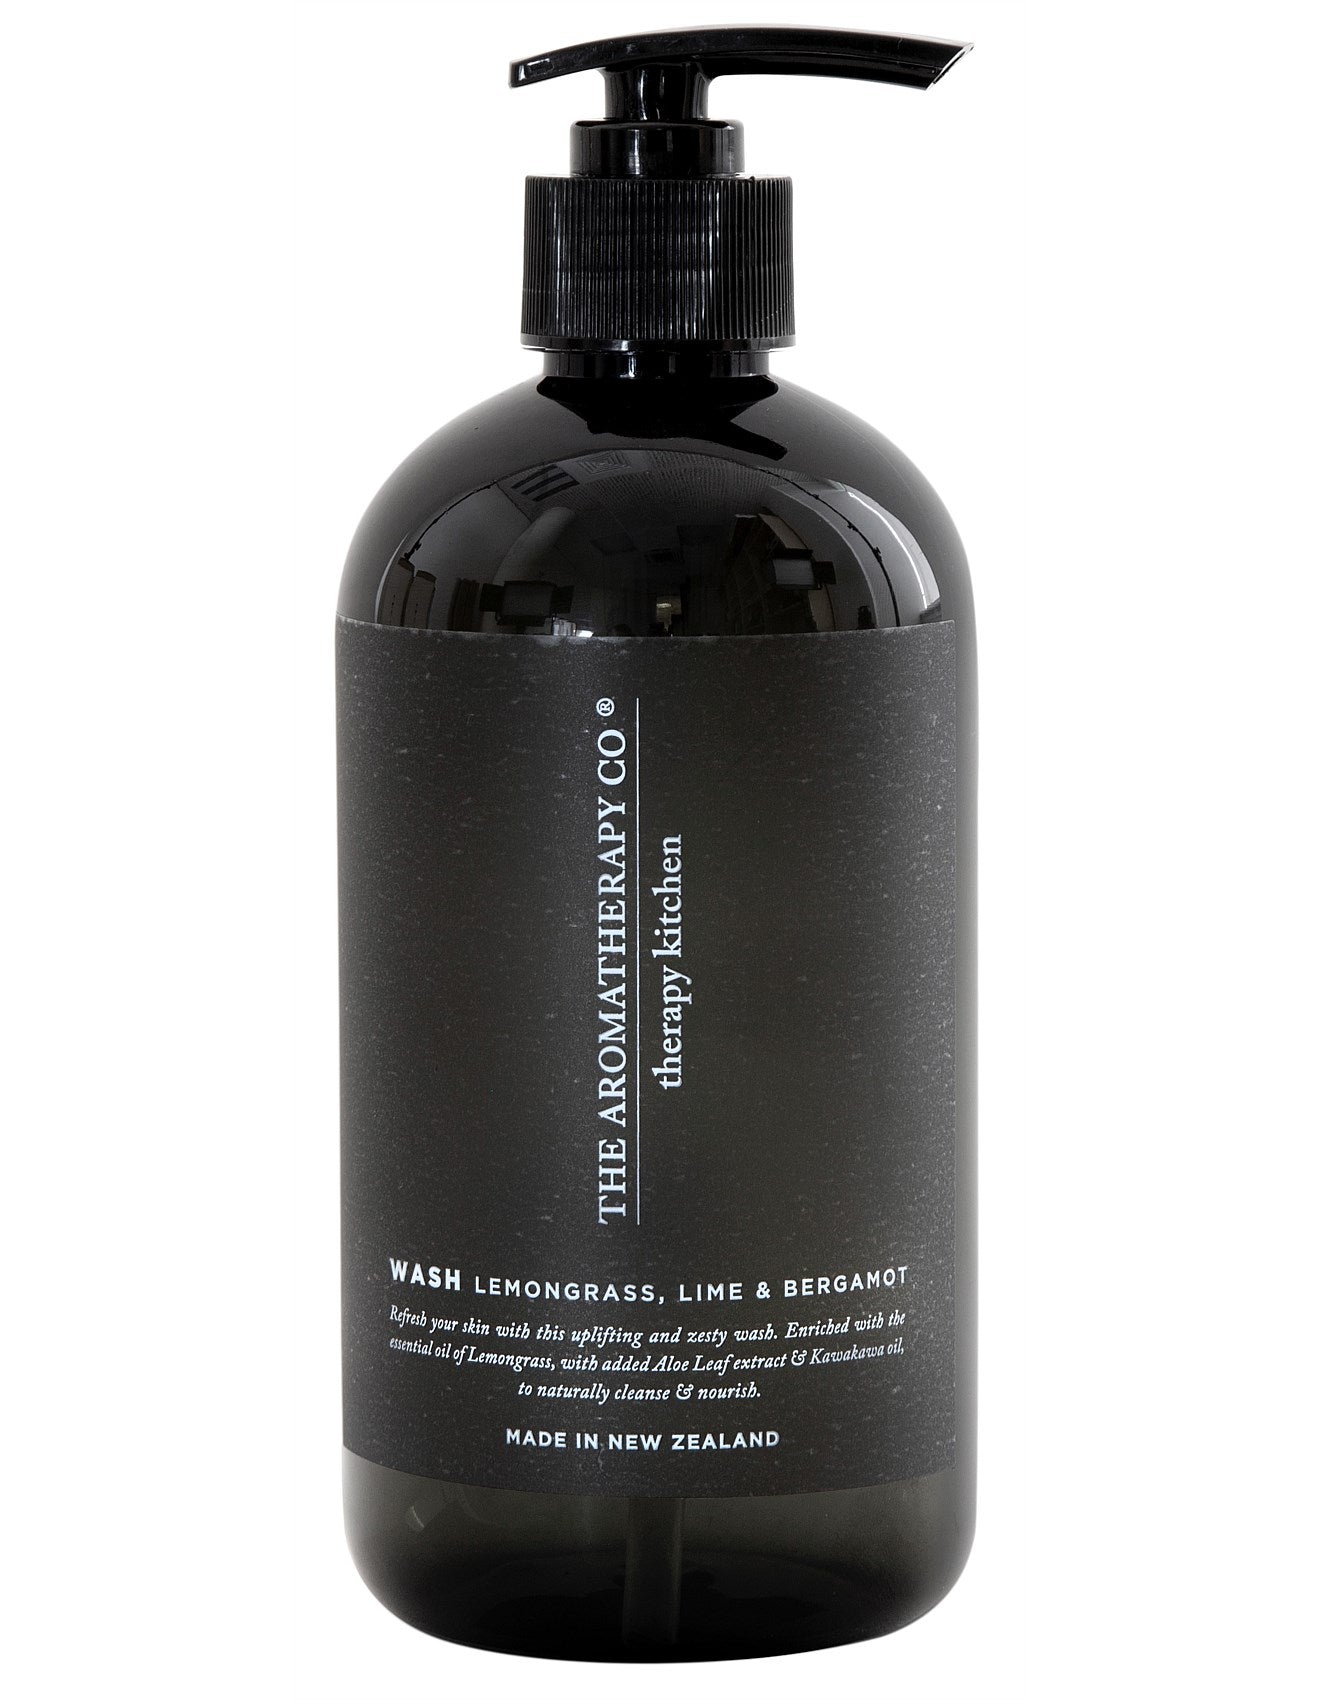 The Aromatherapy Co. Therapy Hand Wash Lemongrass Lime and Bergamot